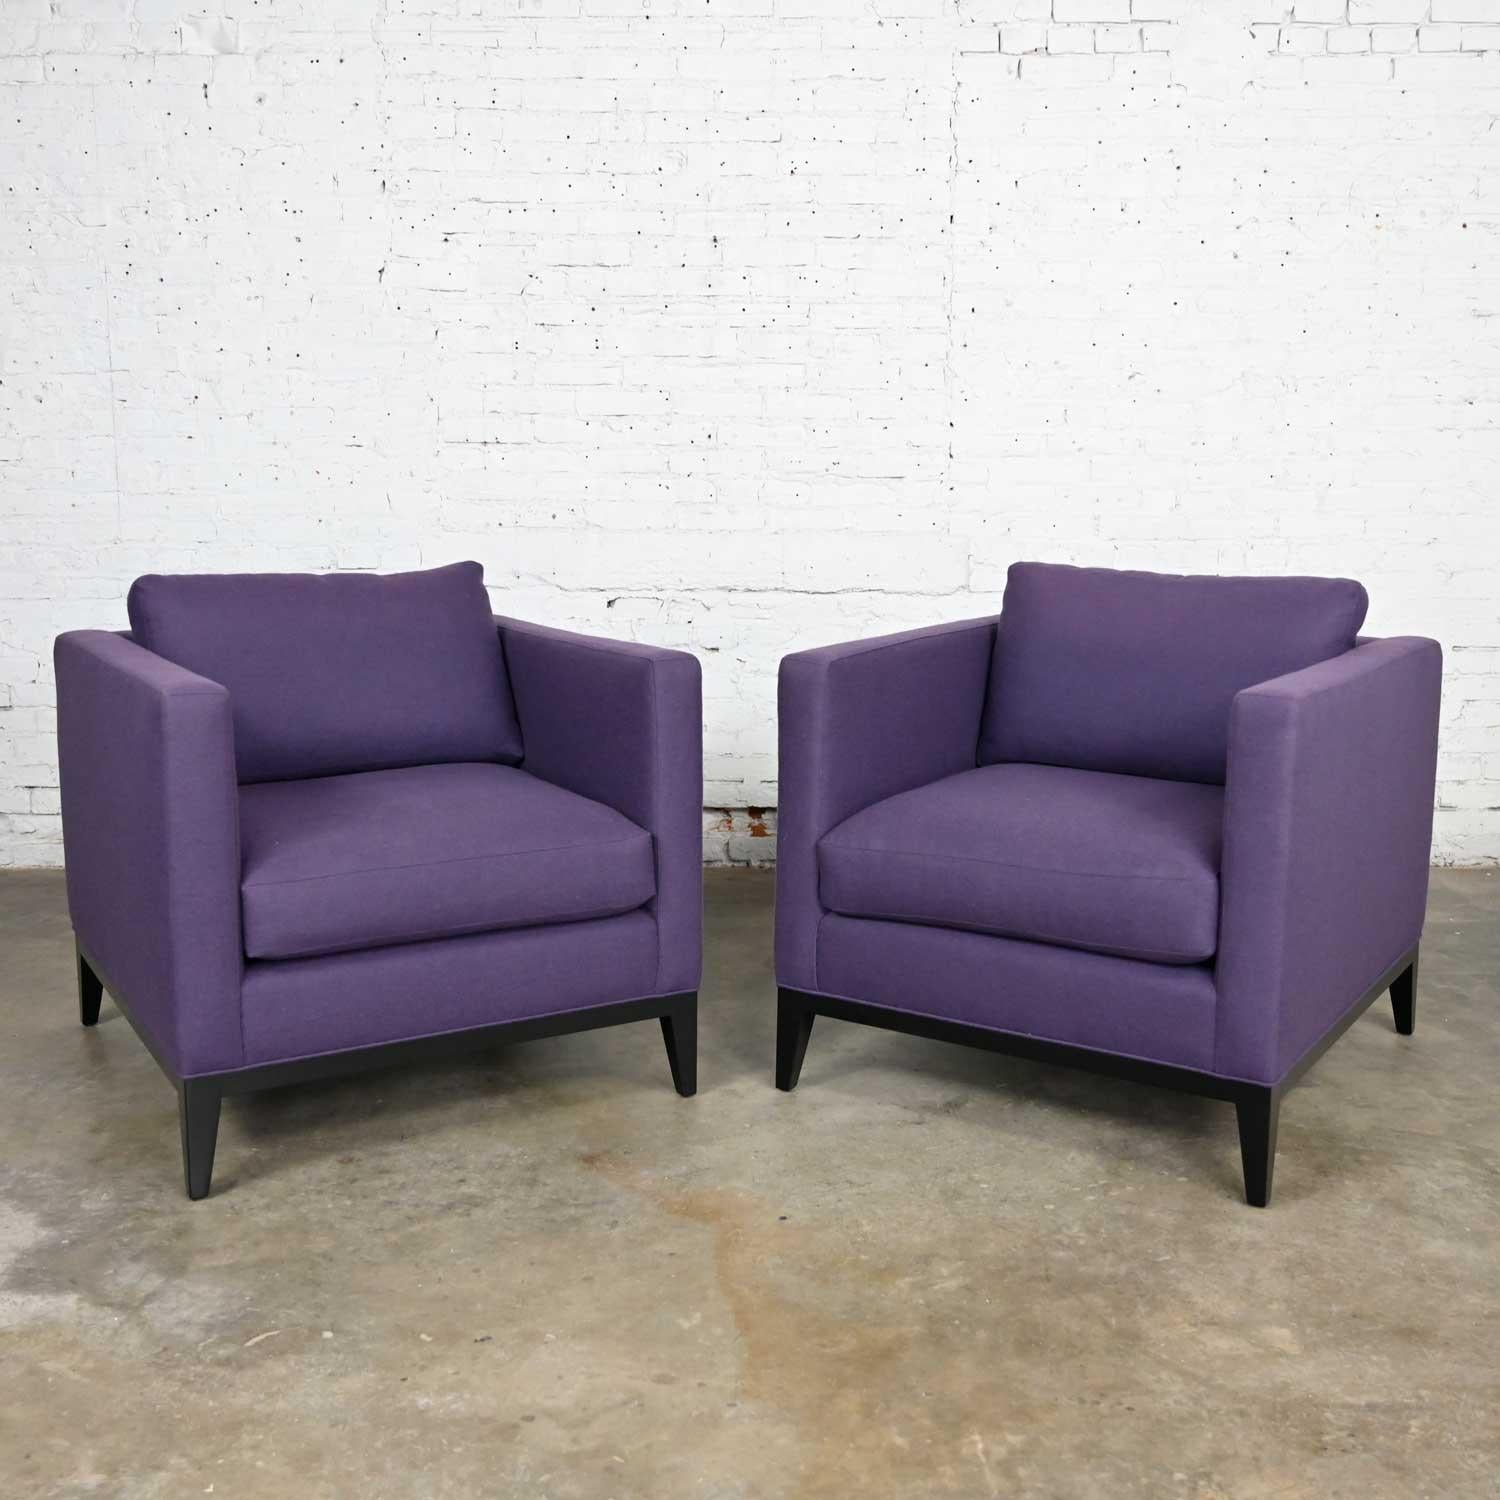 Splendid modern purple plum tone tuxedo style club chairs by Baker a pair. Comprised of loose back & seat cushions with polyester fill & feather down wrap, wool-like plum fabric, & a wood base & legs. Beautiful condition, keeping in mind that these